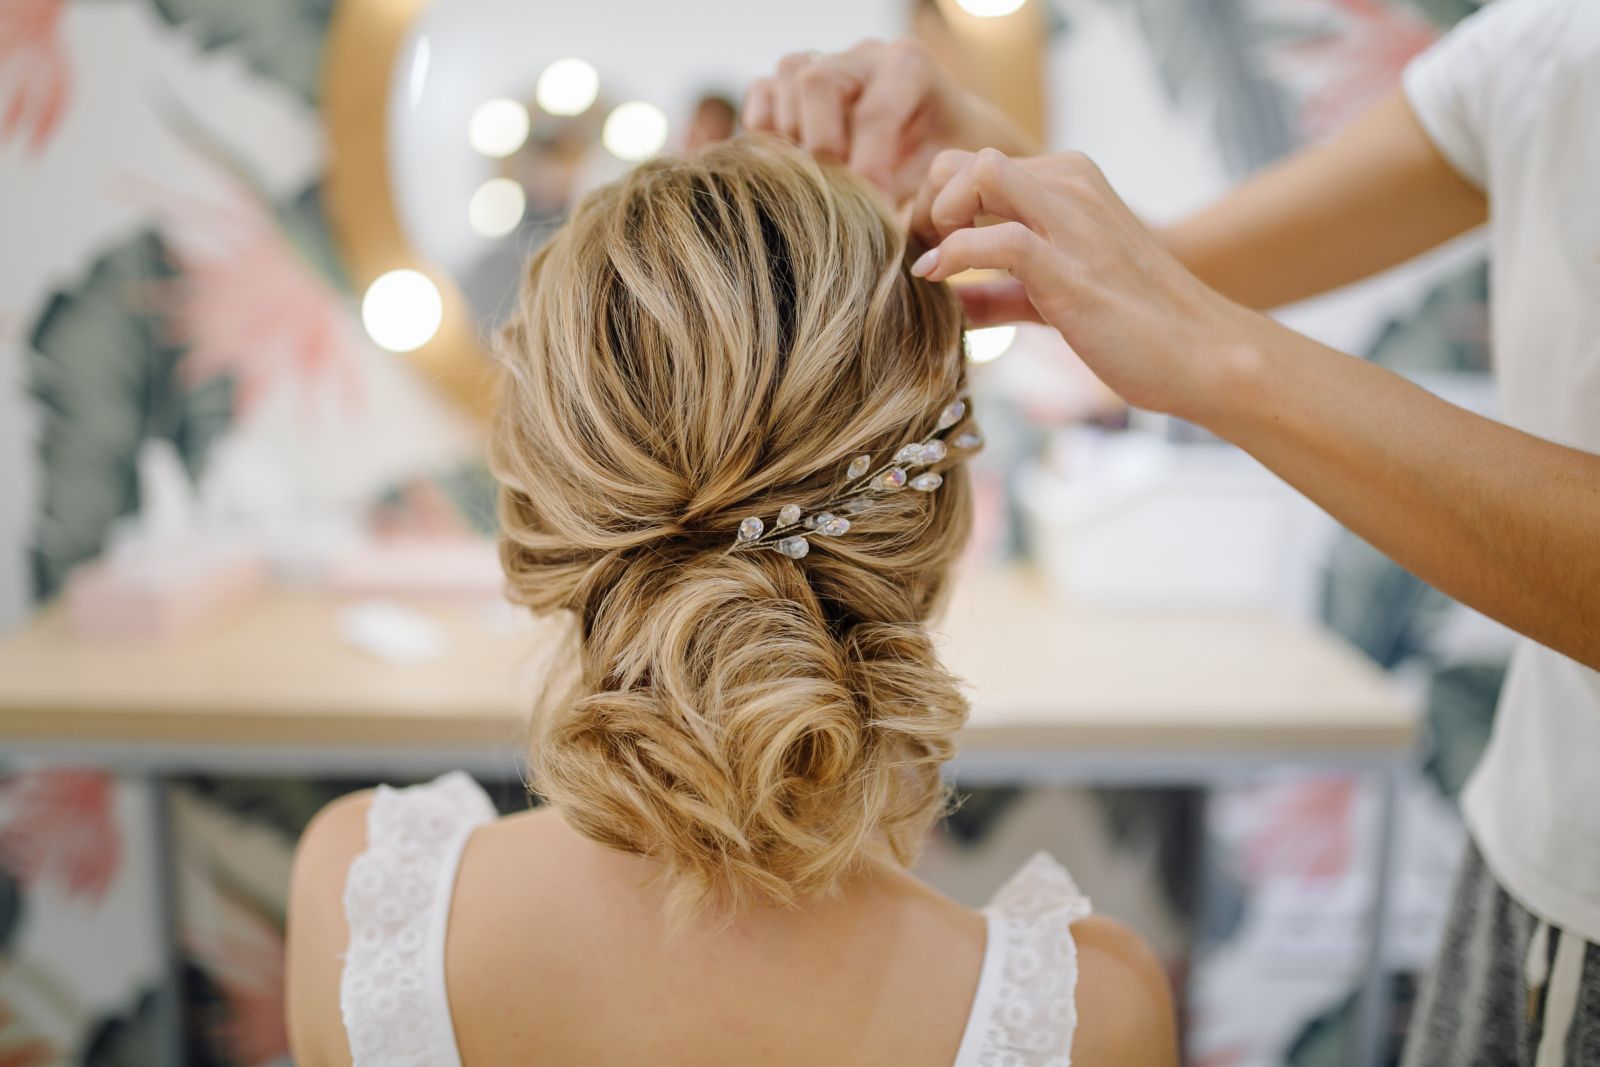 A bride getting her hair ready by a hairdresser in Ibiza